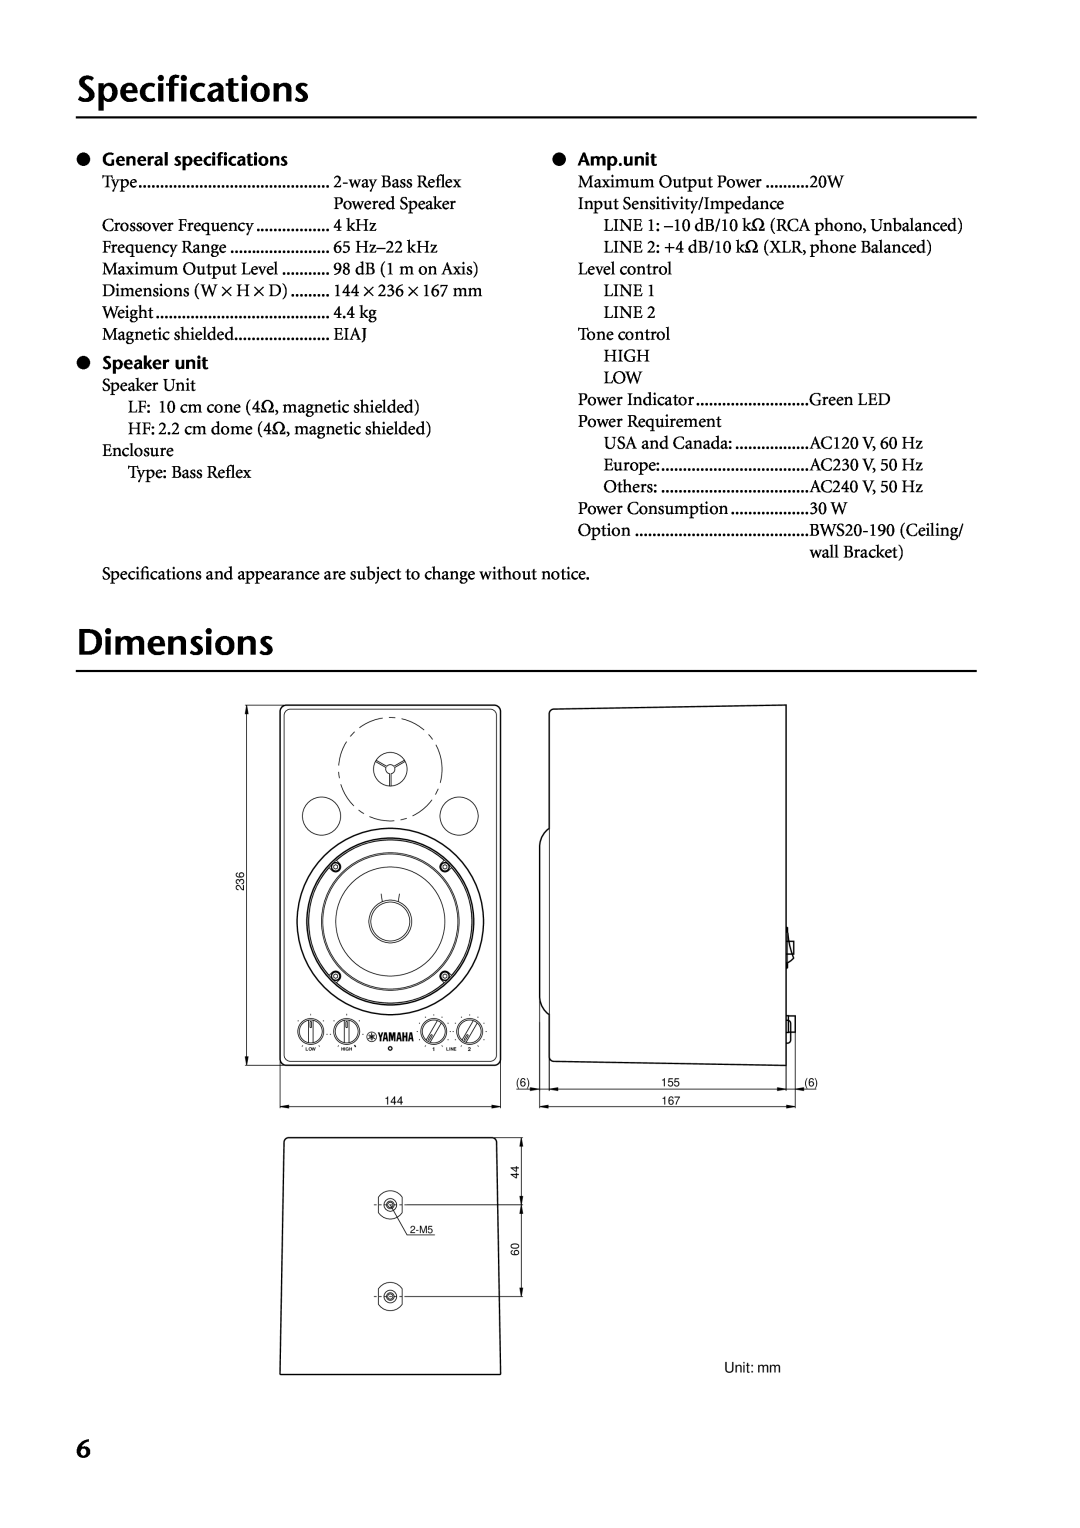 Yamaha MSP3 owner manual Speciﬁcations, Dimensions, General speciﬁcations, Speaker unit, Amp.unit 